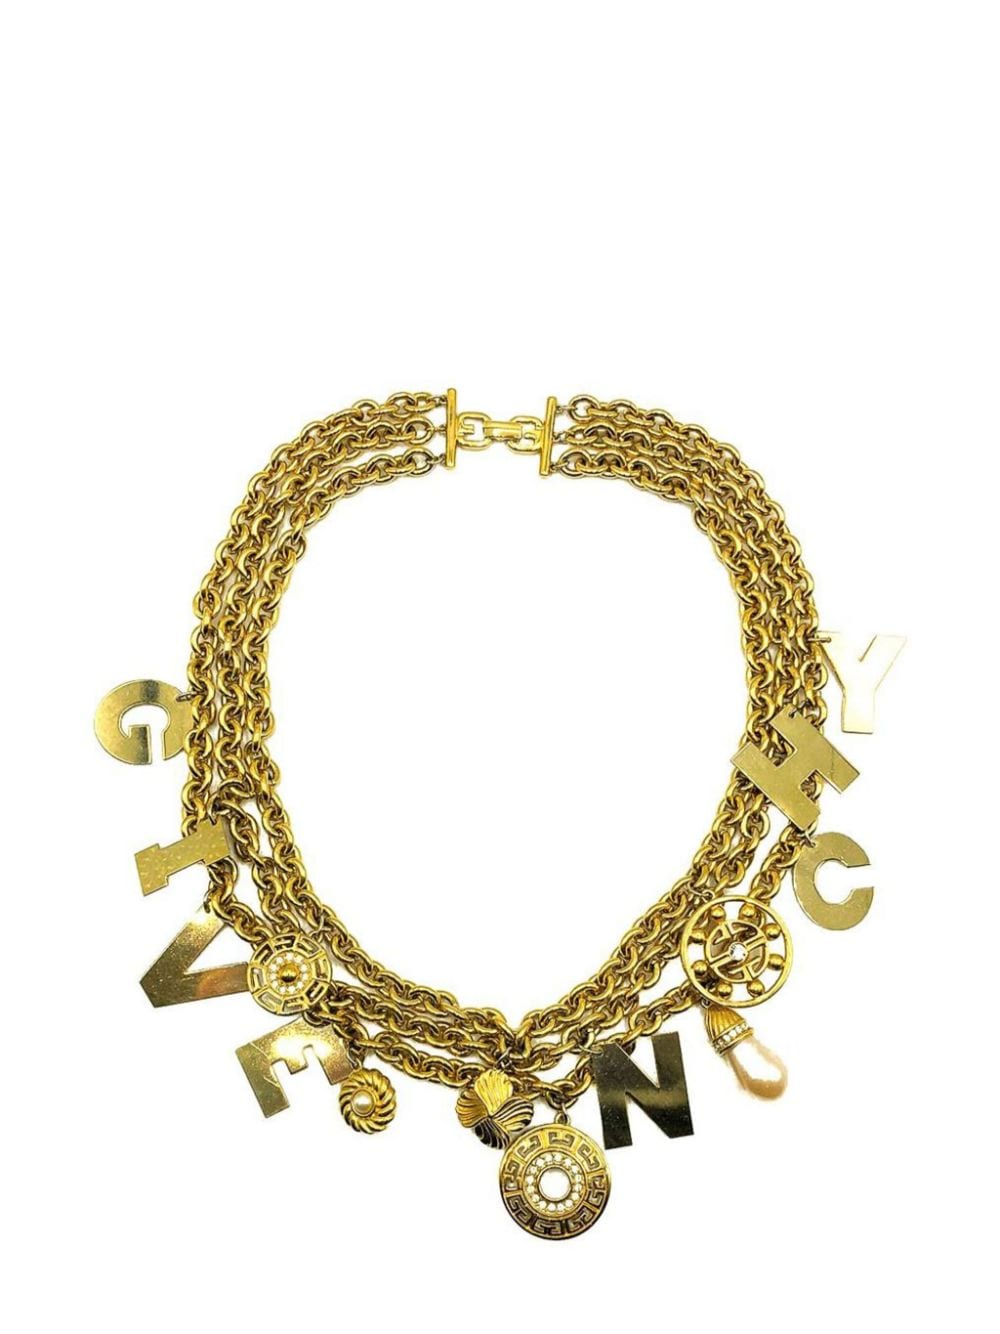 Givenchy Pre-Owned Vintage Givenchy Standout Runway Spell Out Letter Charm Chain Collar 1980s - Gold von Givenchy Pre-Owned